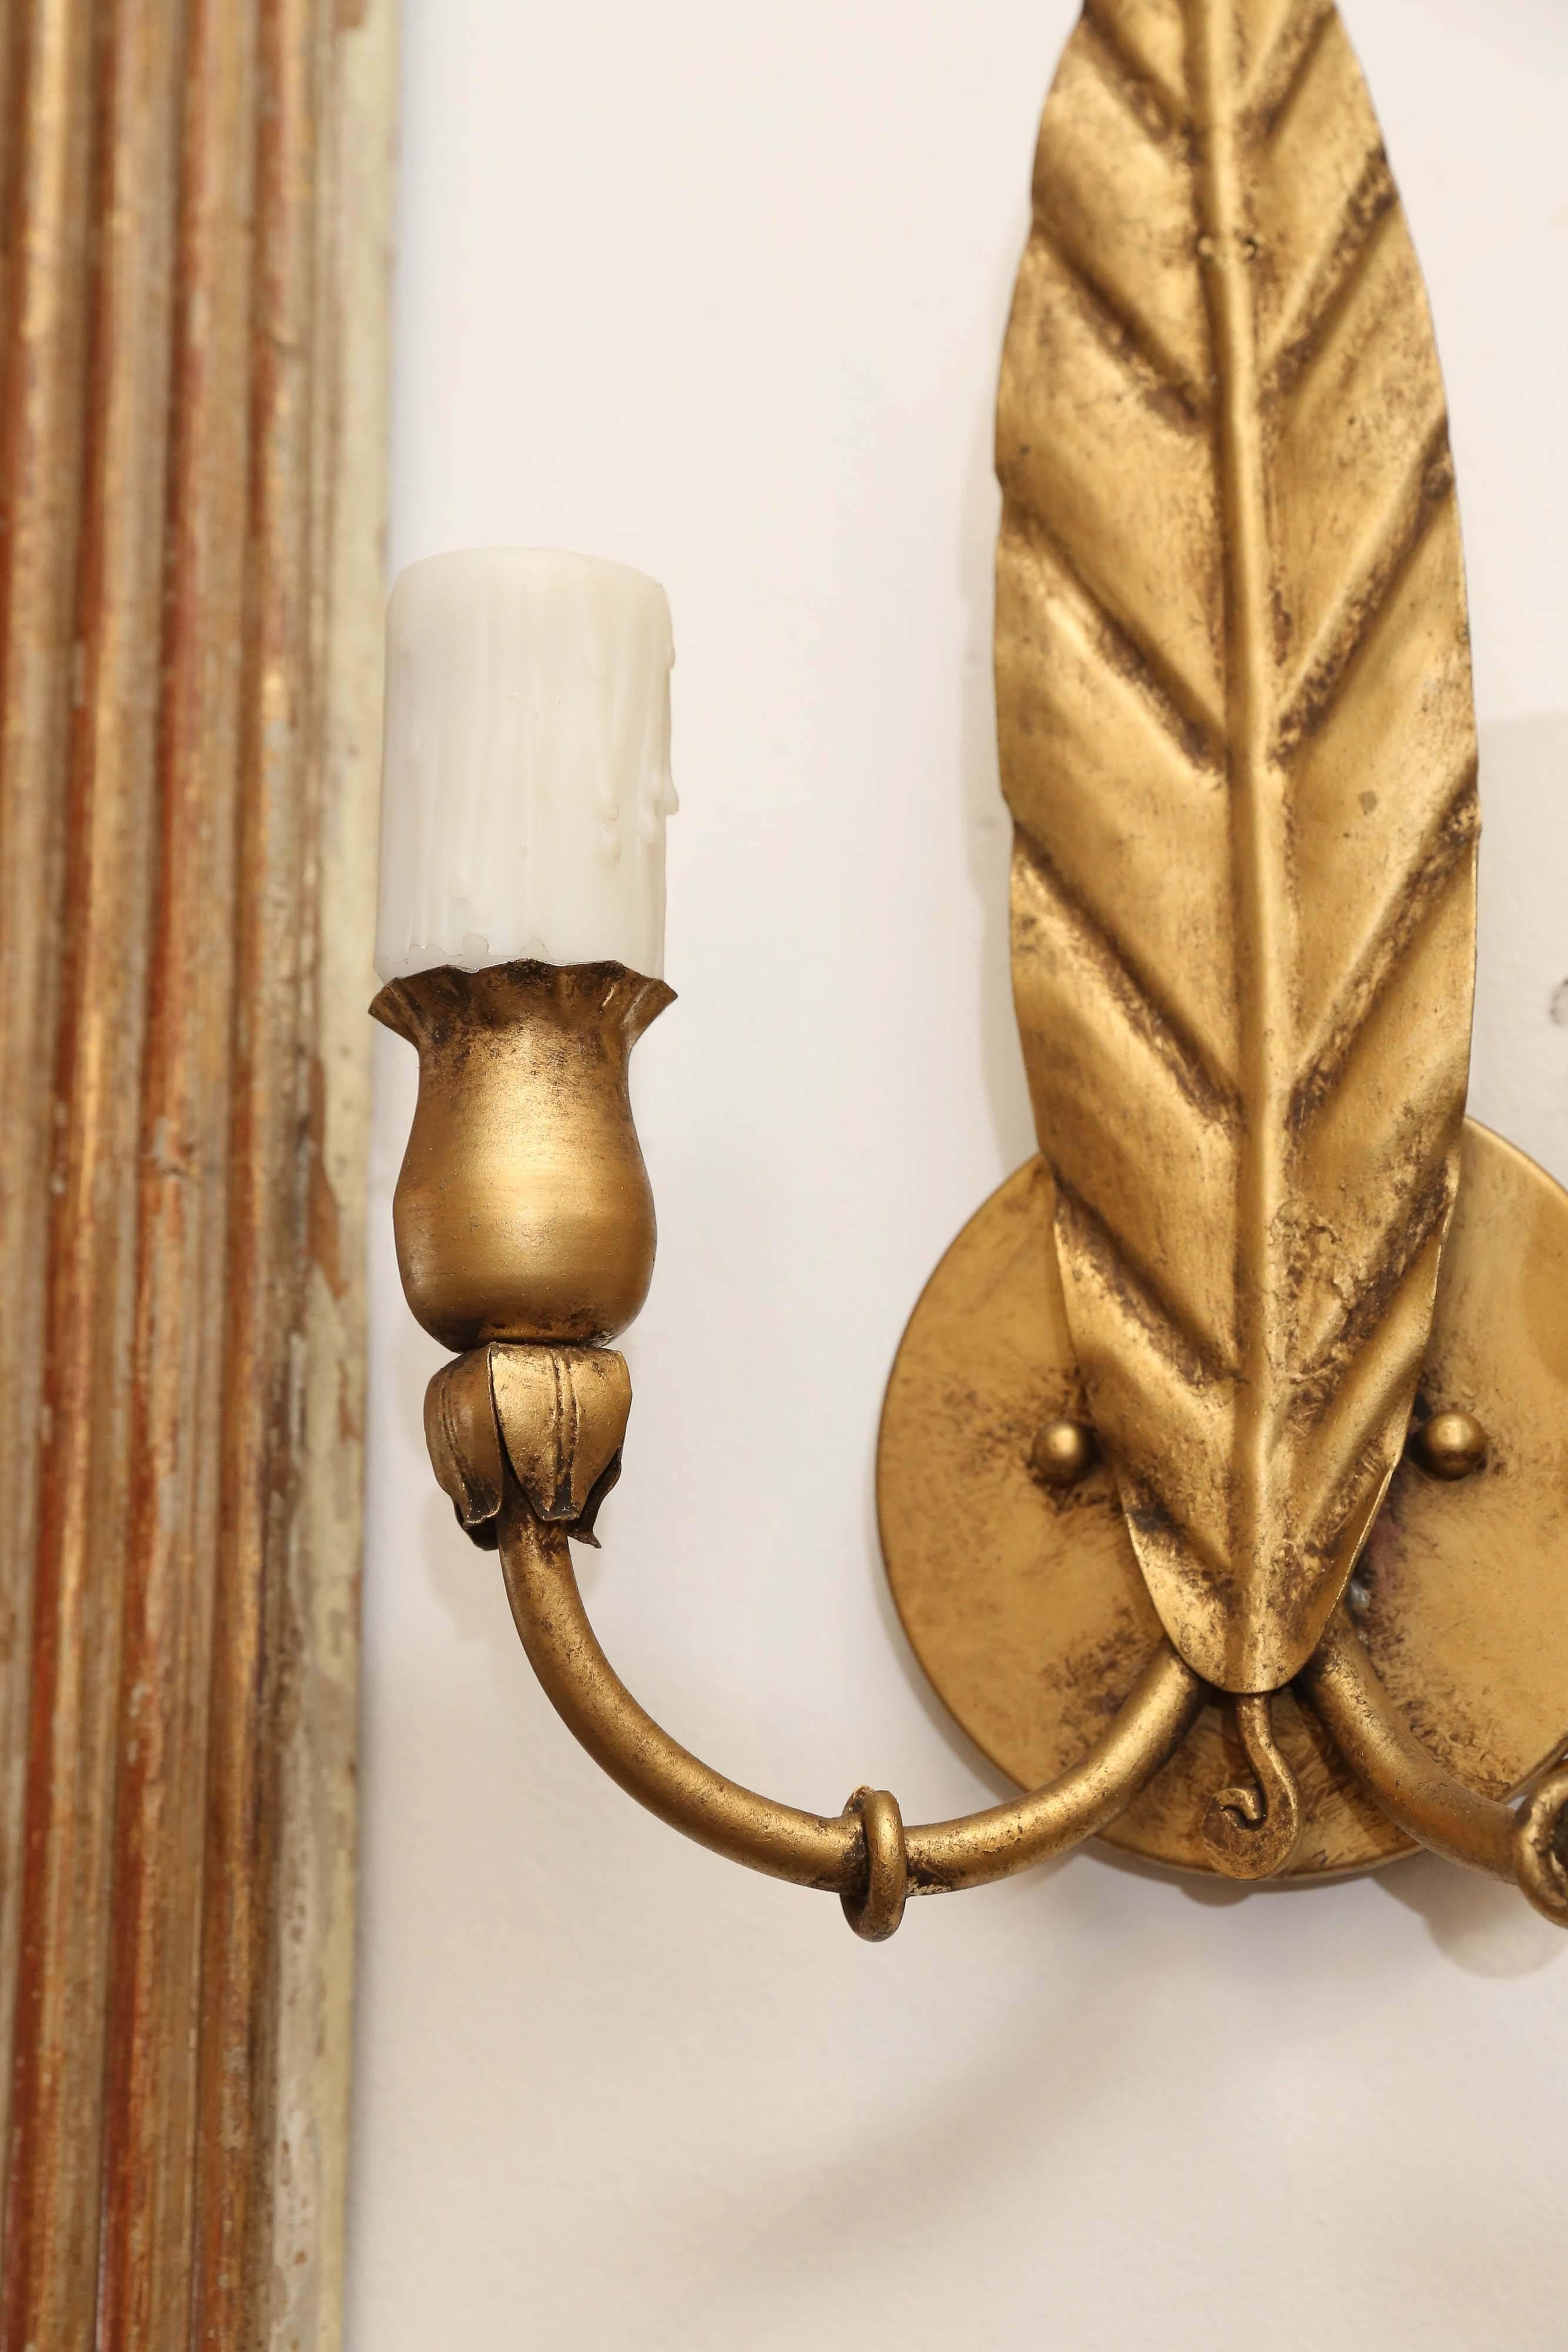 Pair of gilt metal sconces from Spain that have been recently rewired. Each one has two lights with wax sleeves.